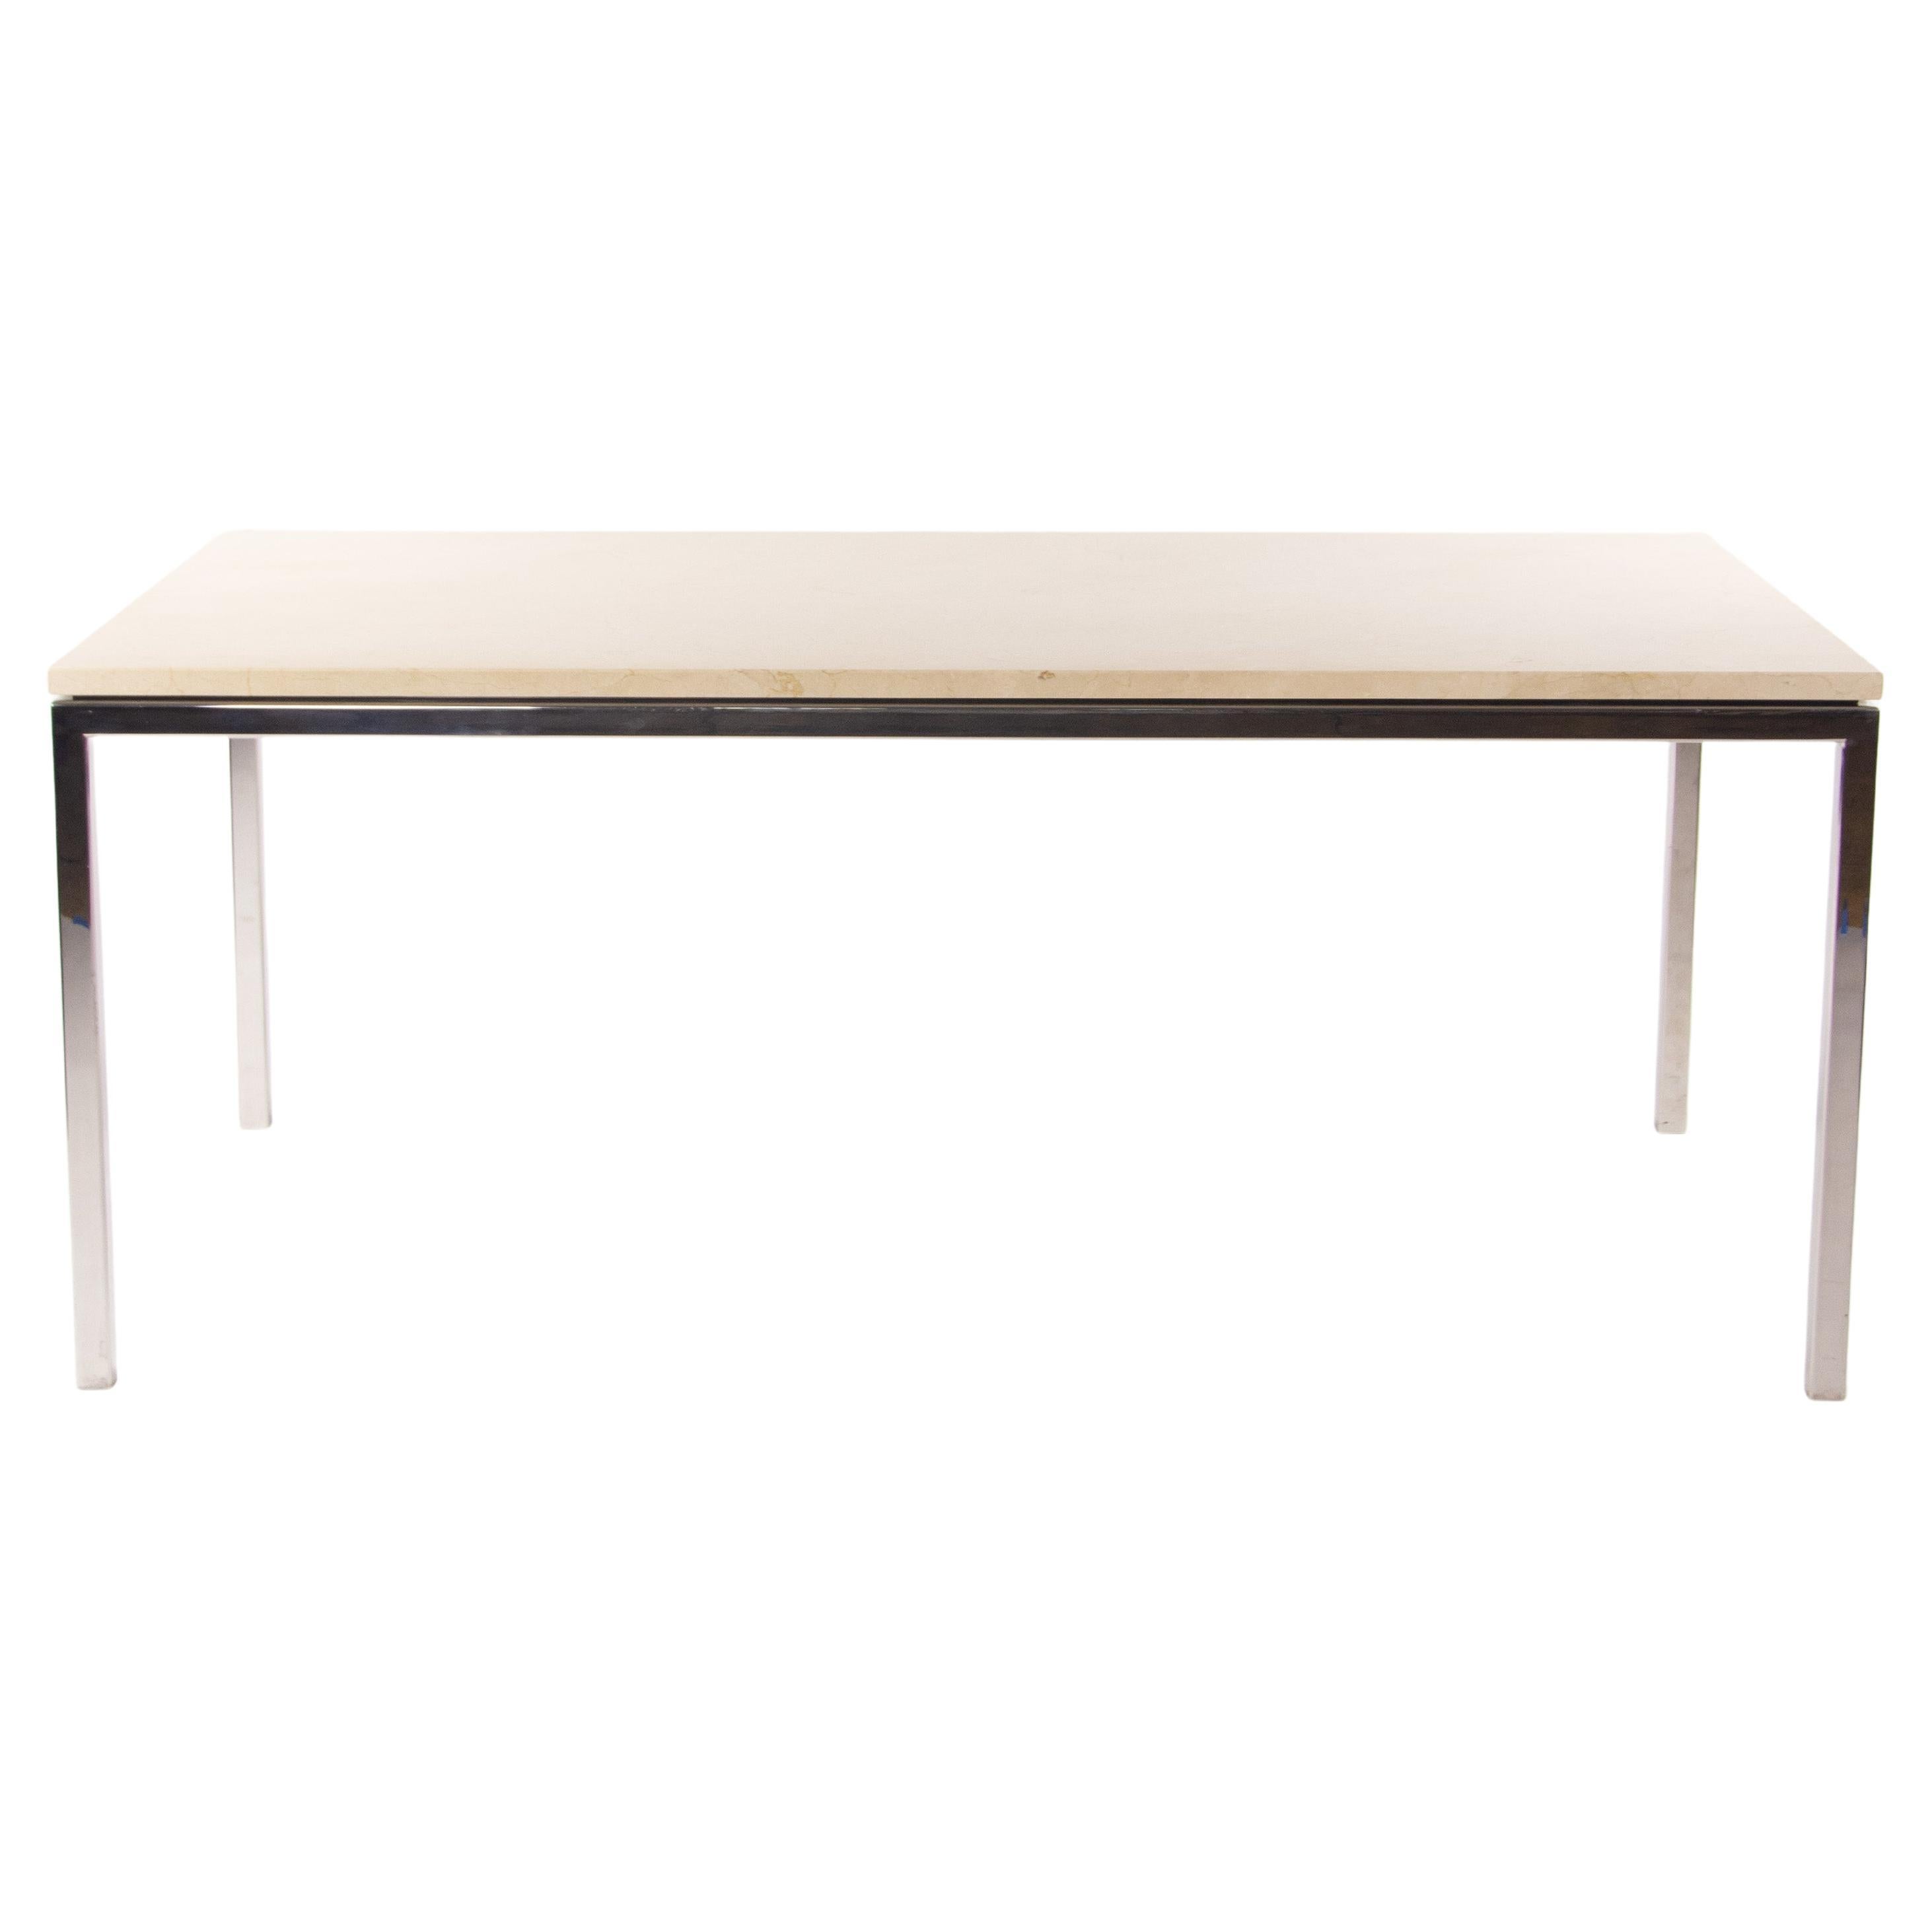 Granite 6x3 ft Meeting Dining Conference Table Beige w/ Base from SOM Project